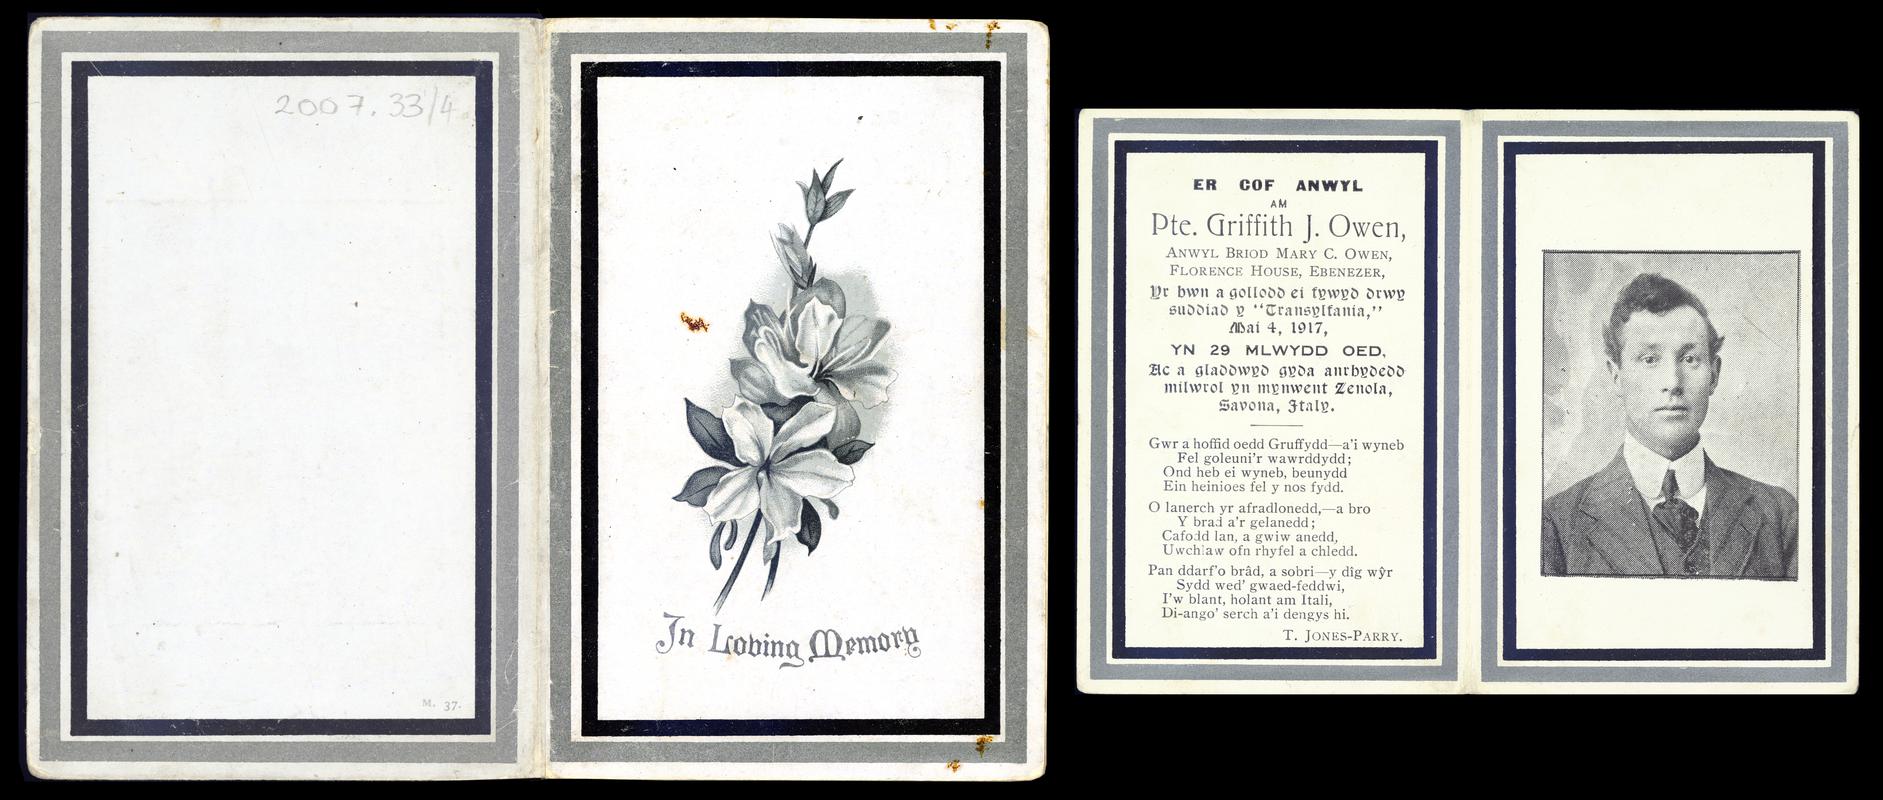 Memorial card for Pte. Griffith J. Owen who died during the First World War on 4th May 1917, aged 29, and buried in Zenola Cemetery, Savona, Italy (front &amp; Back)